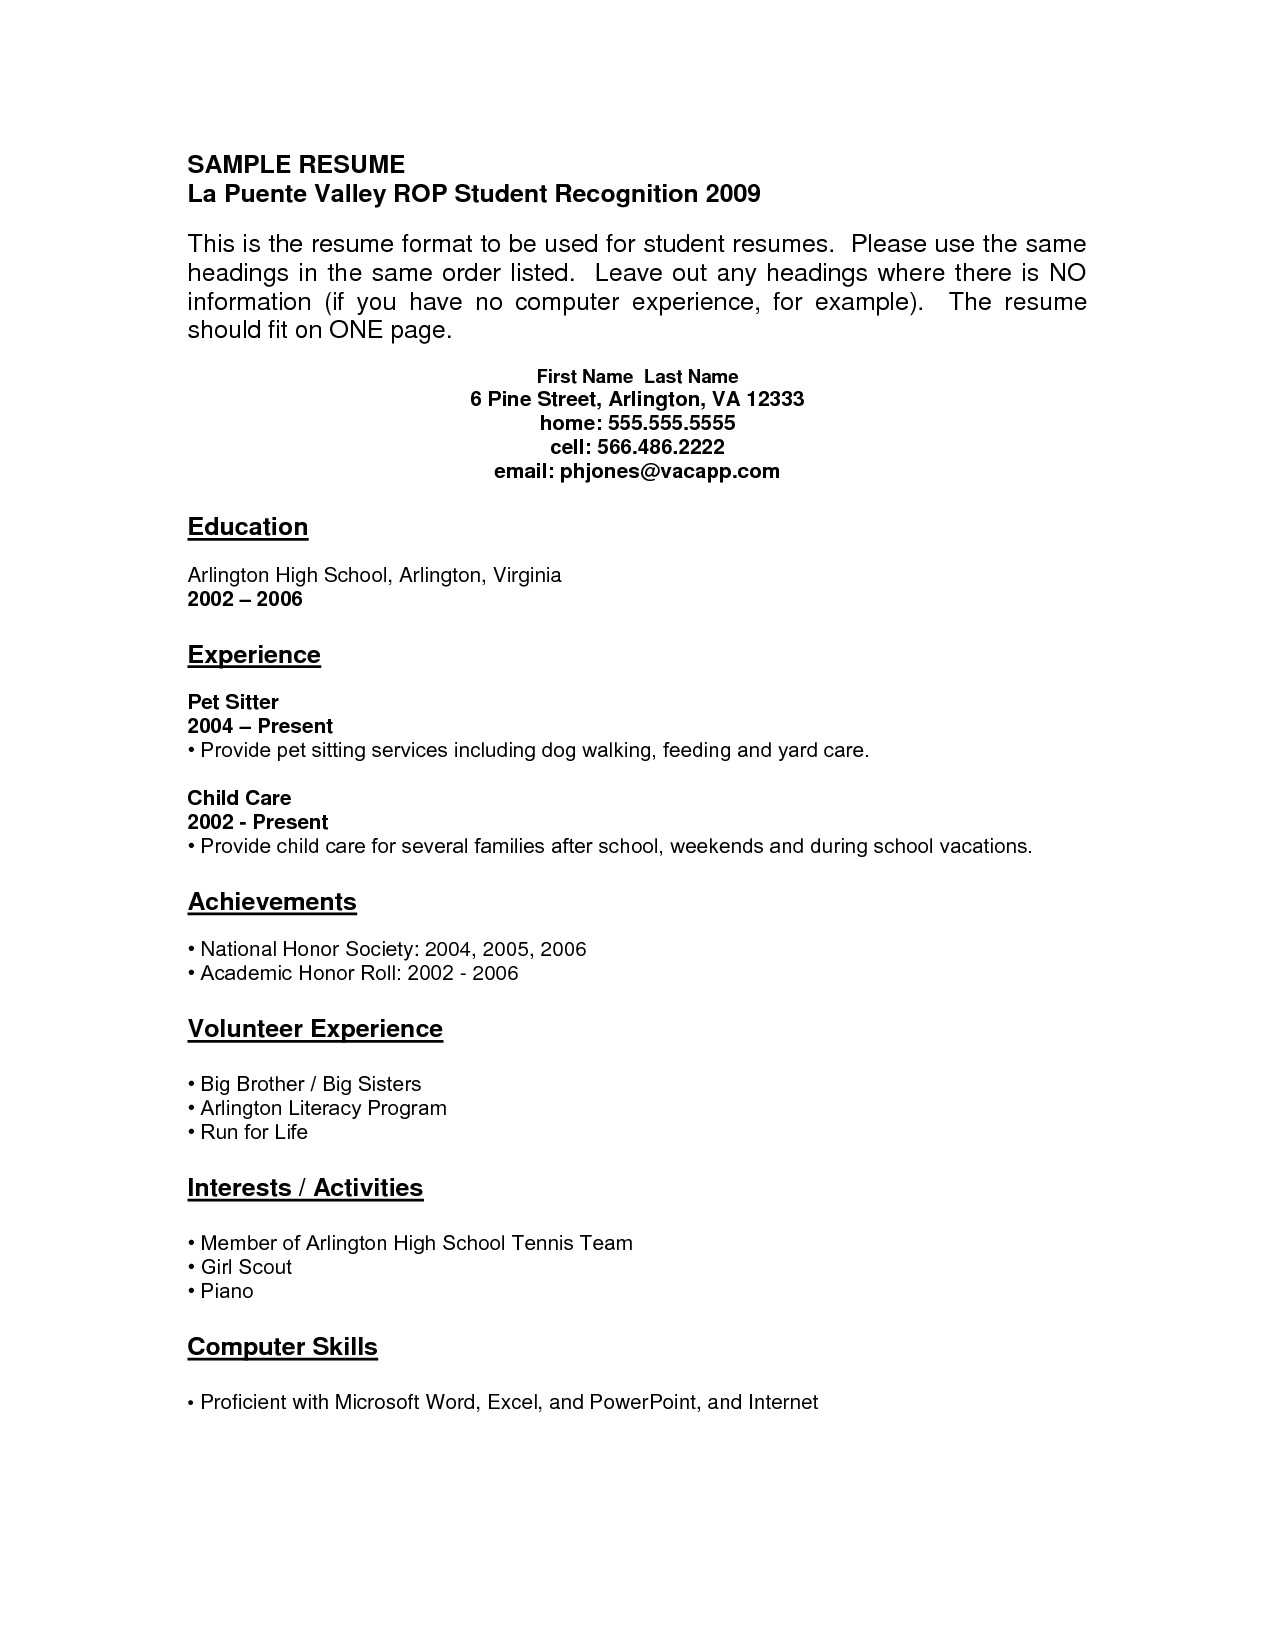 Sample Resume for A Highschool Student with No Experience Resume for Highschool Students with No Experience Work